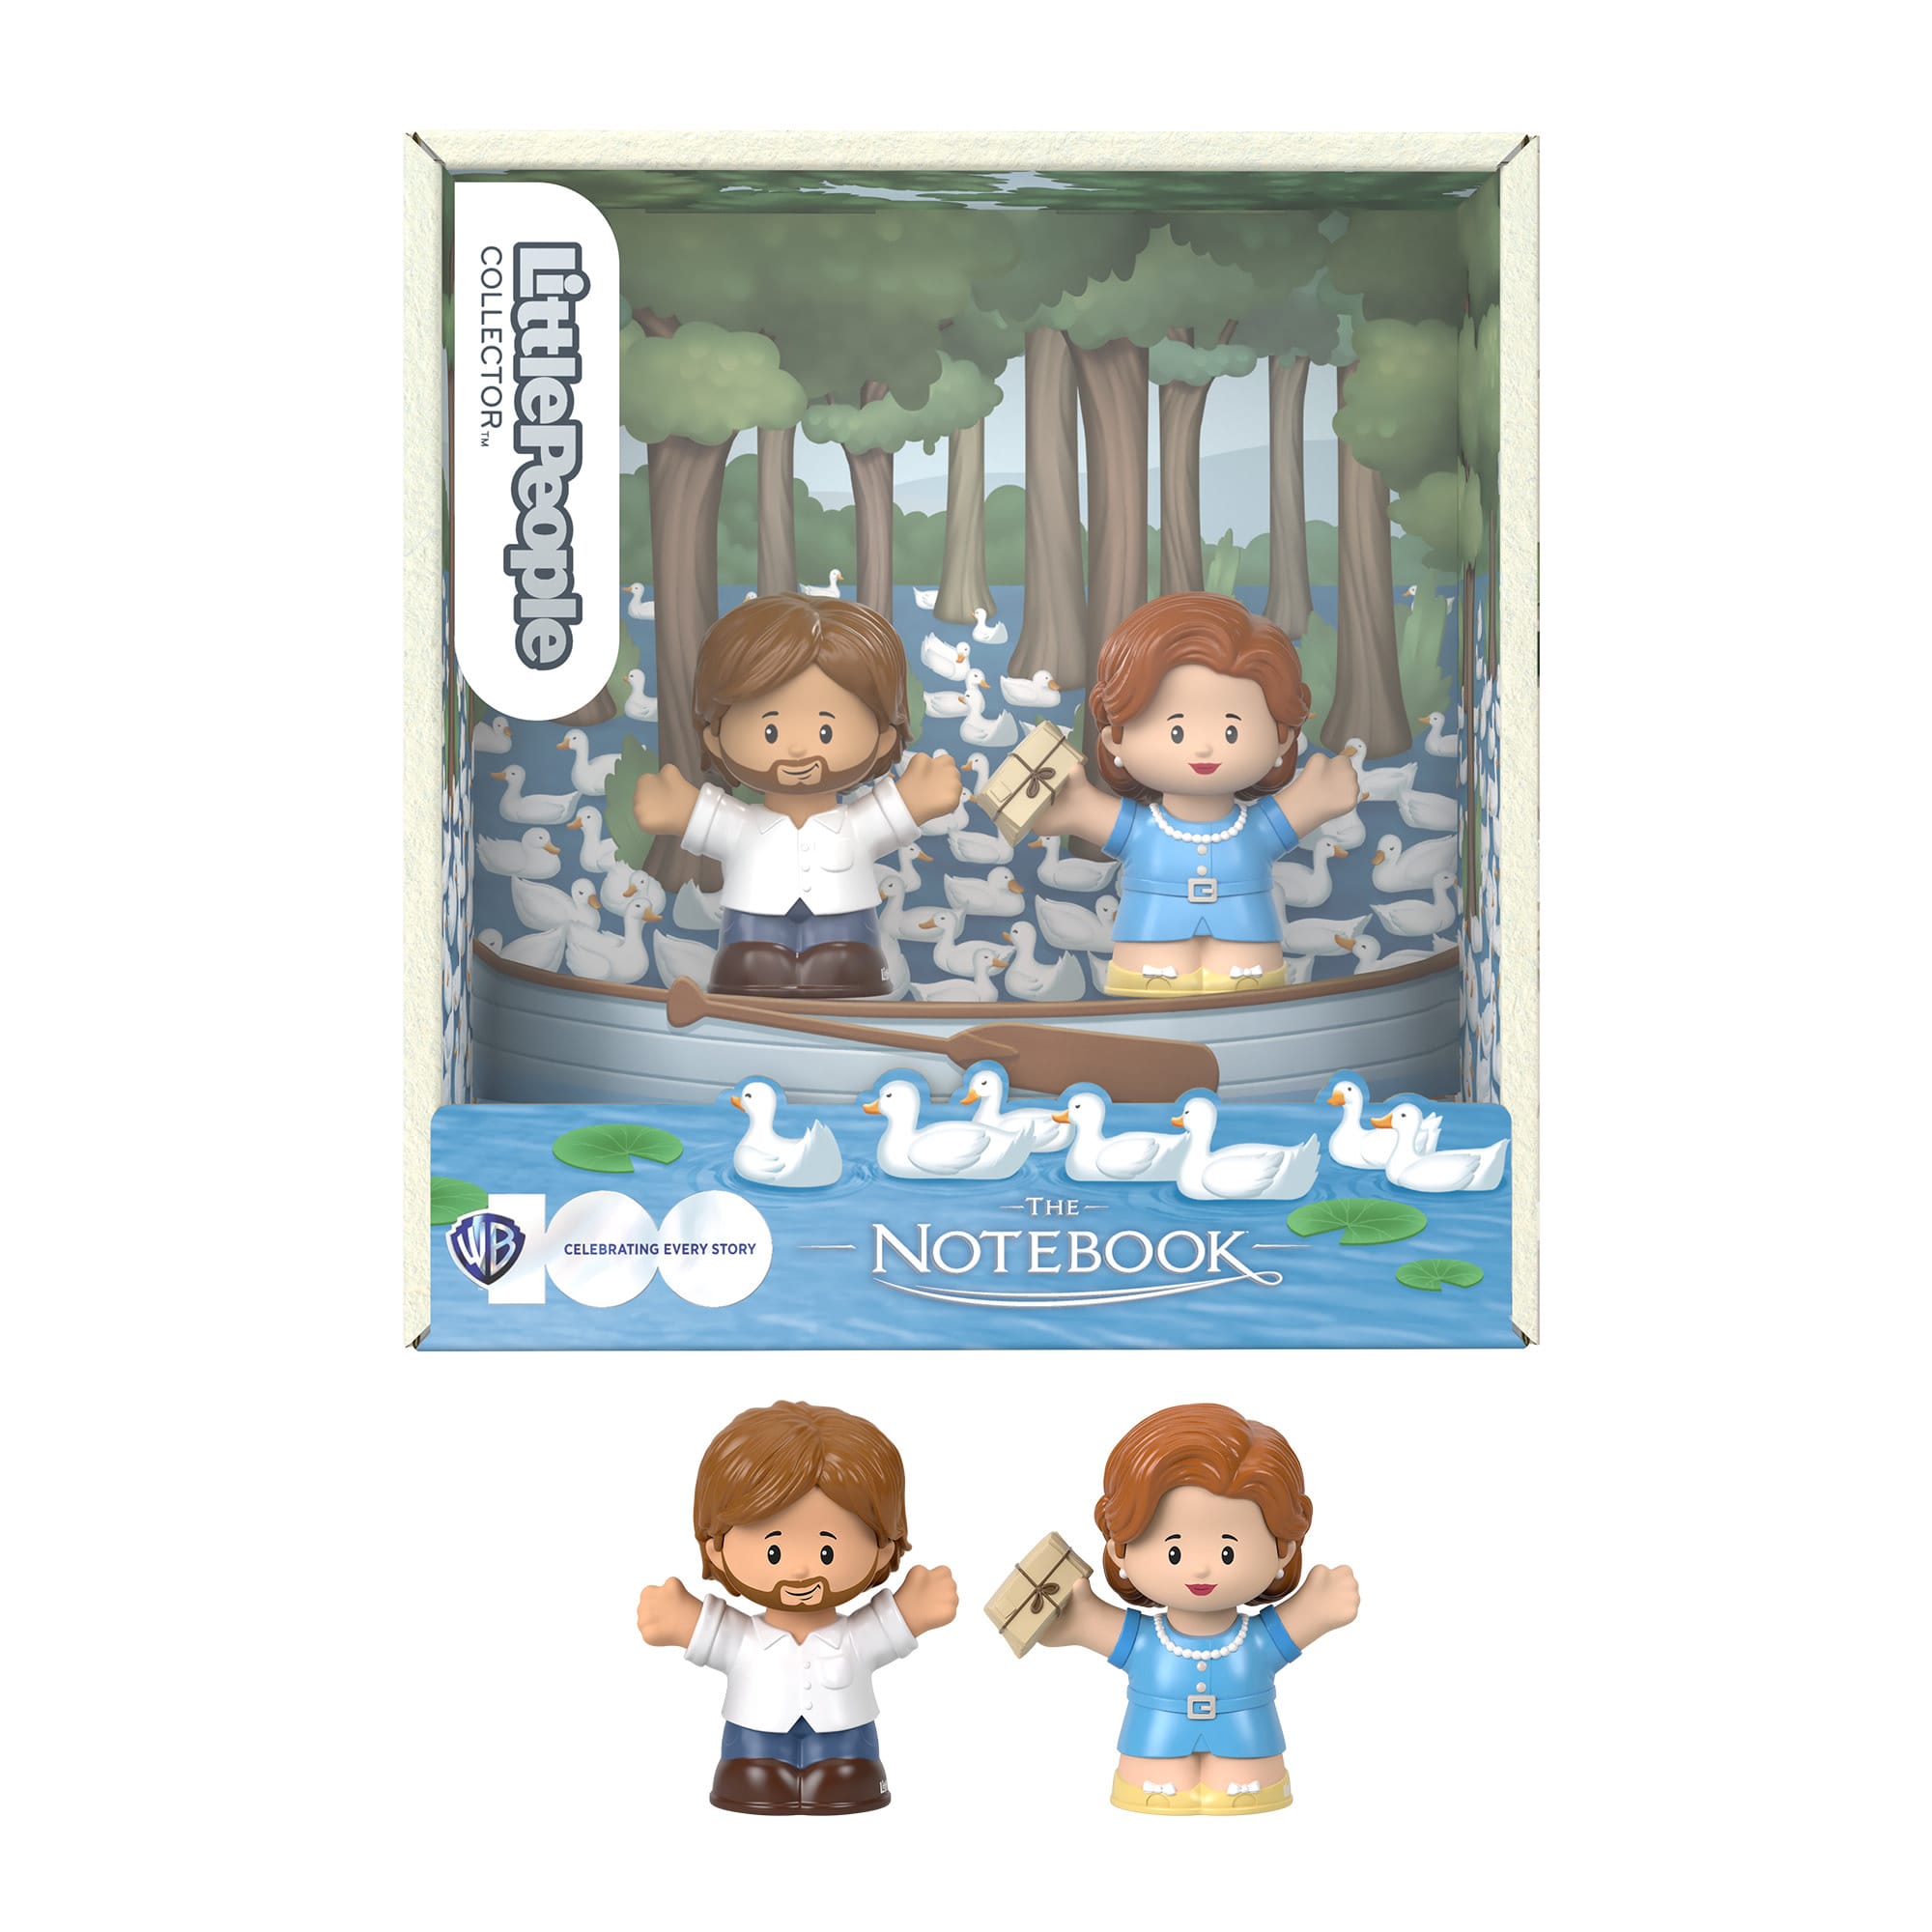 Little People Collector The Notebook Figure Set